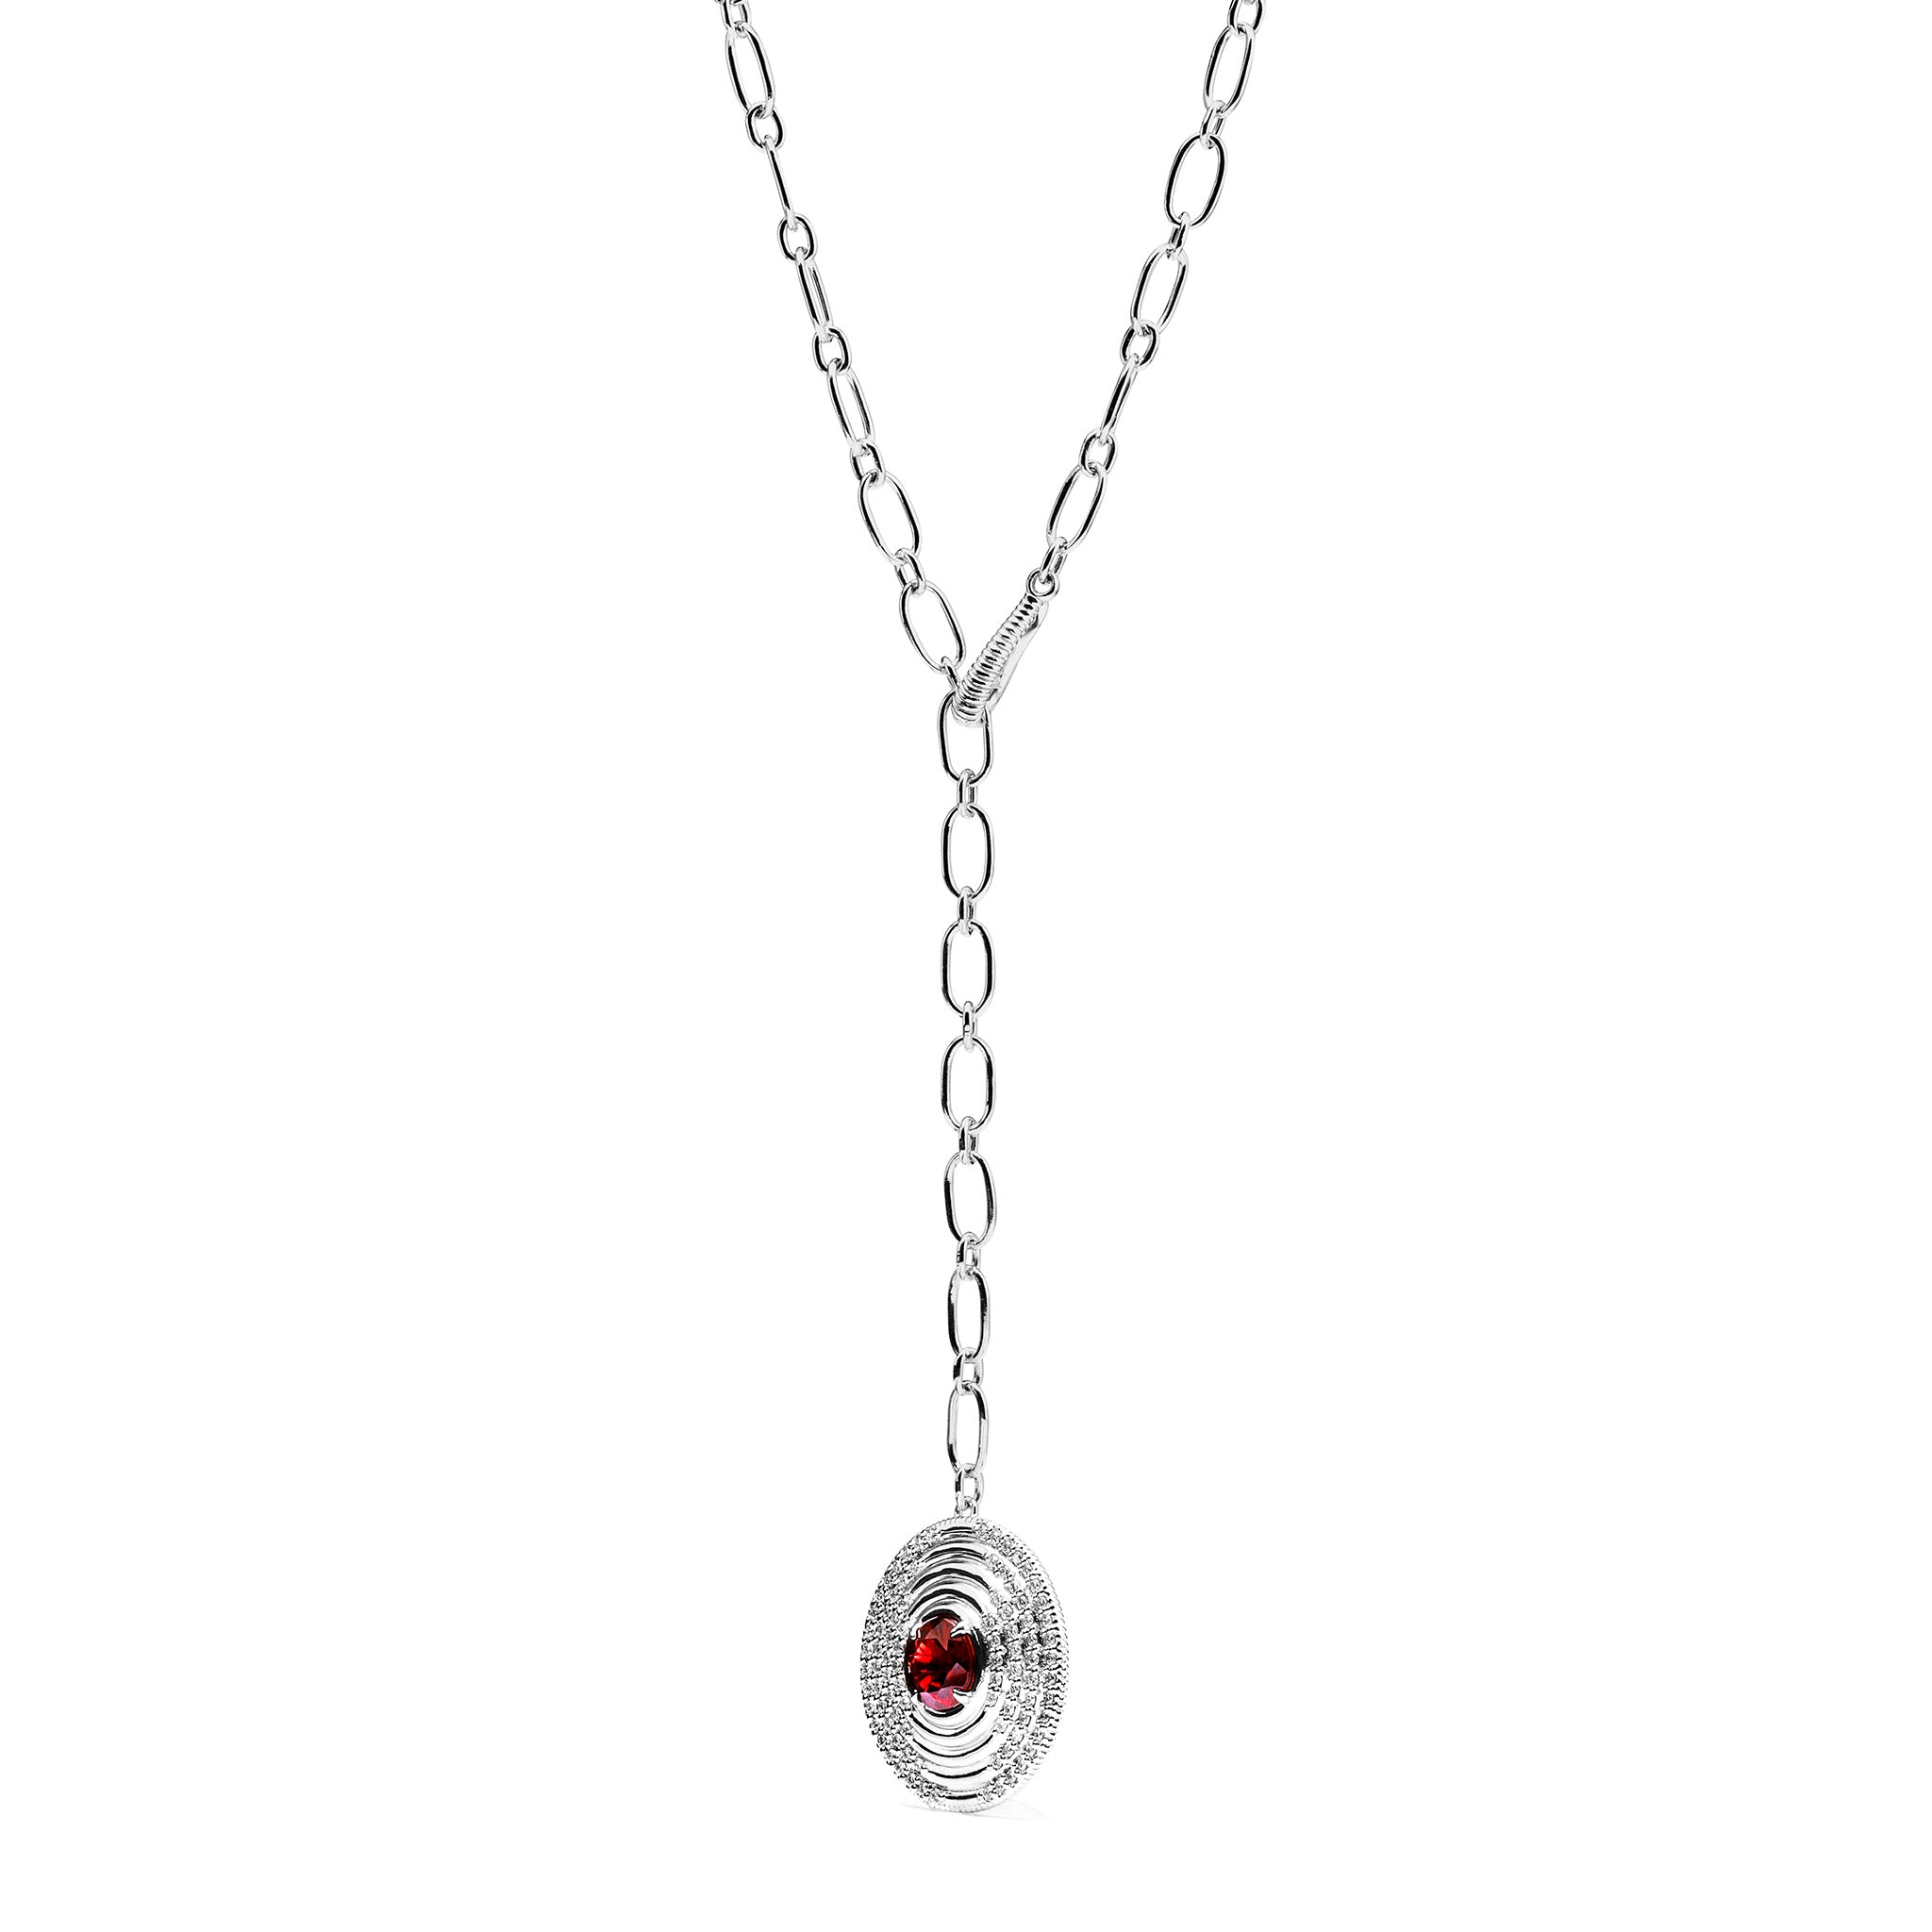 Max Drop Necklace with Garnet and Diamonds